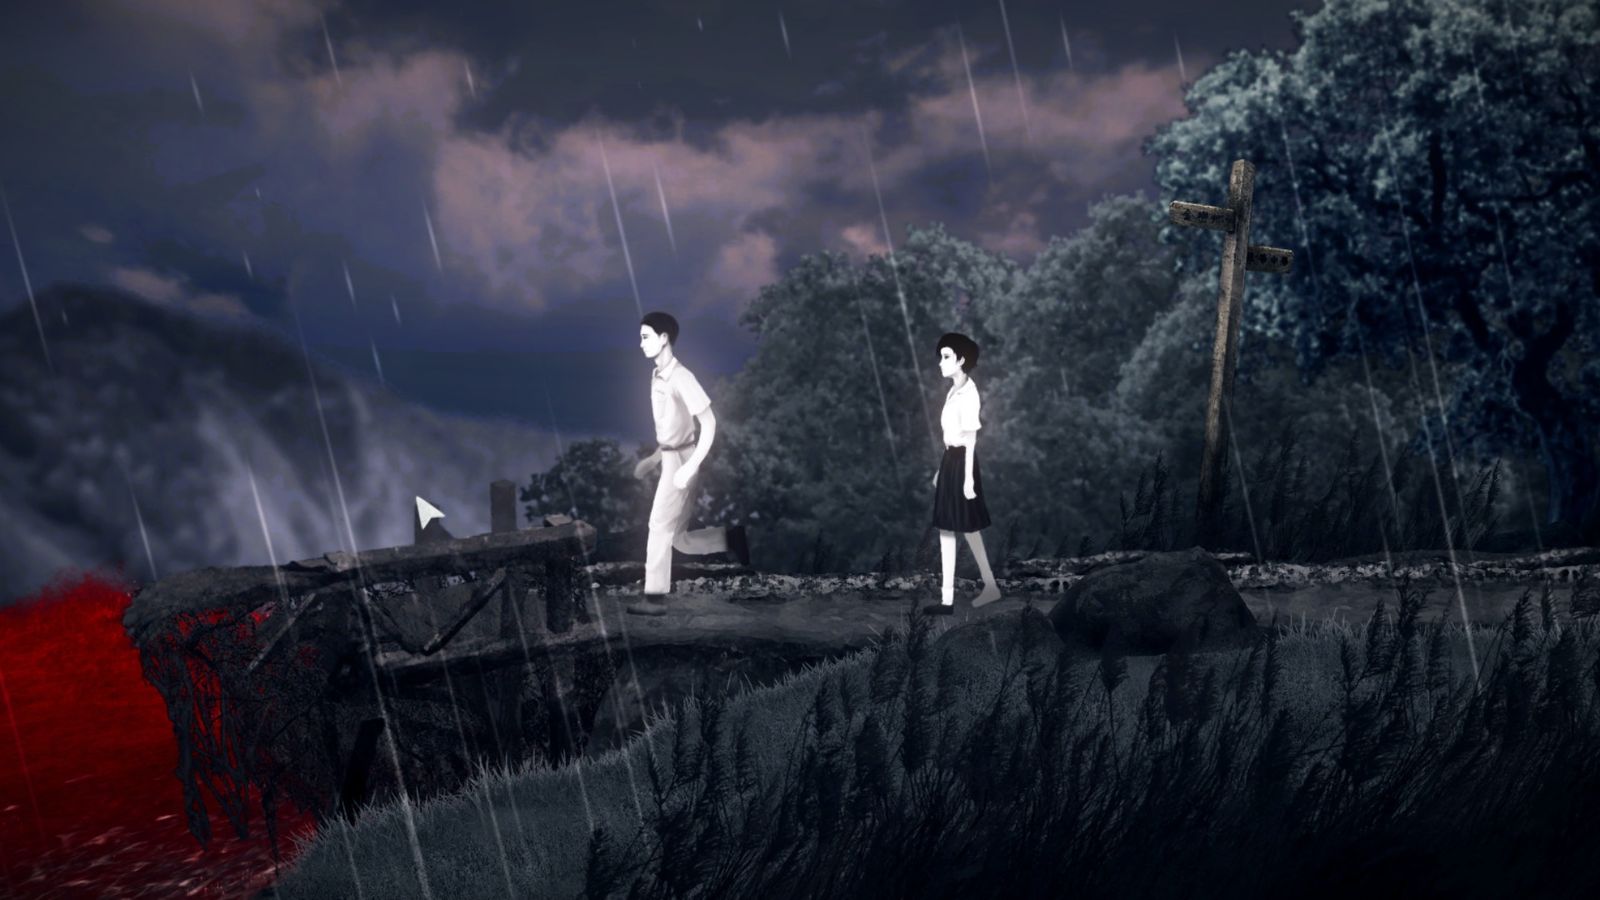 Screenshot from Detention, showing two characters walking across a rainy bridge